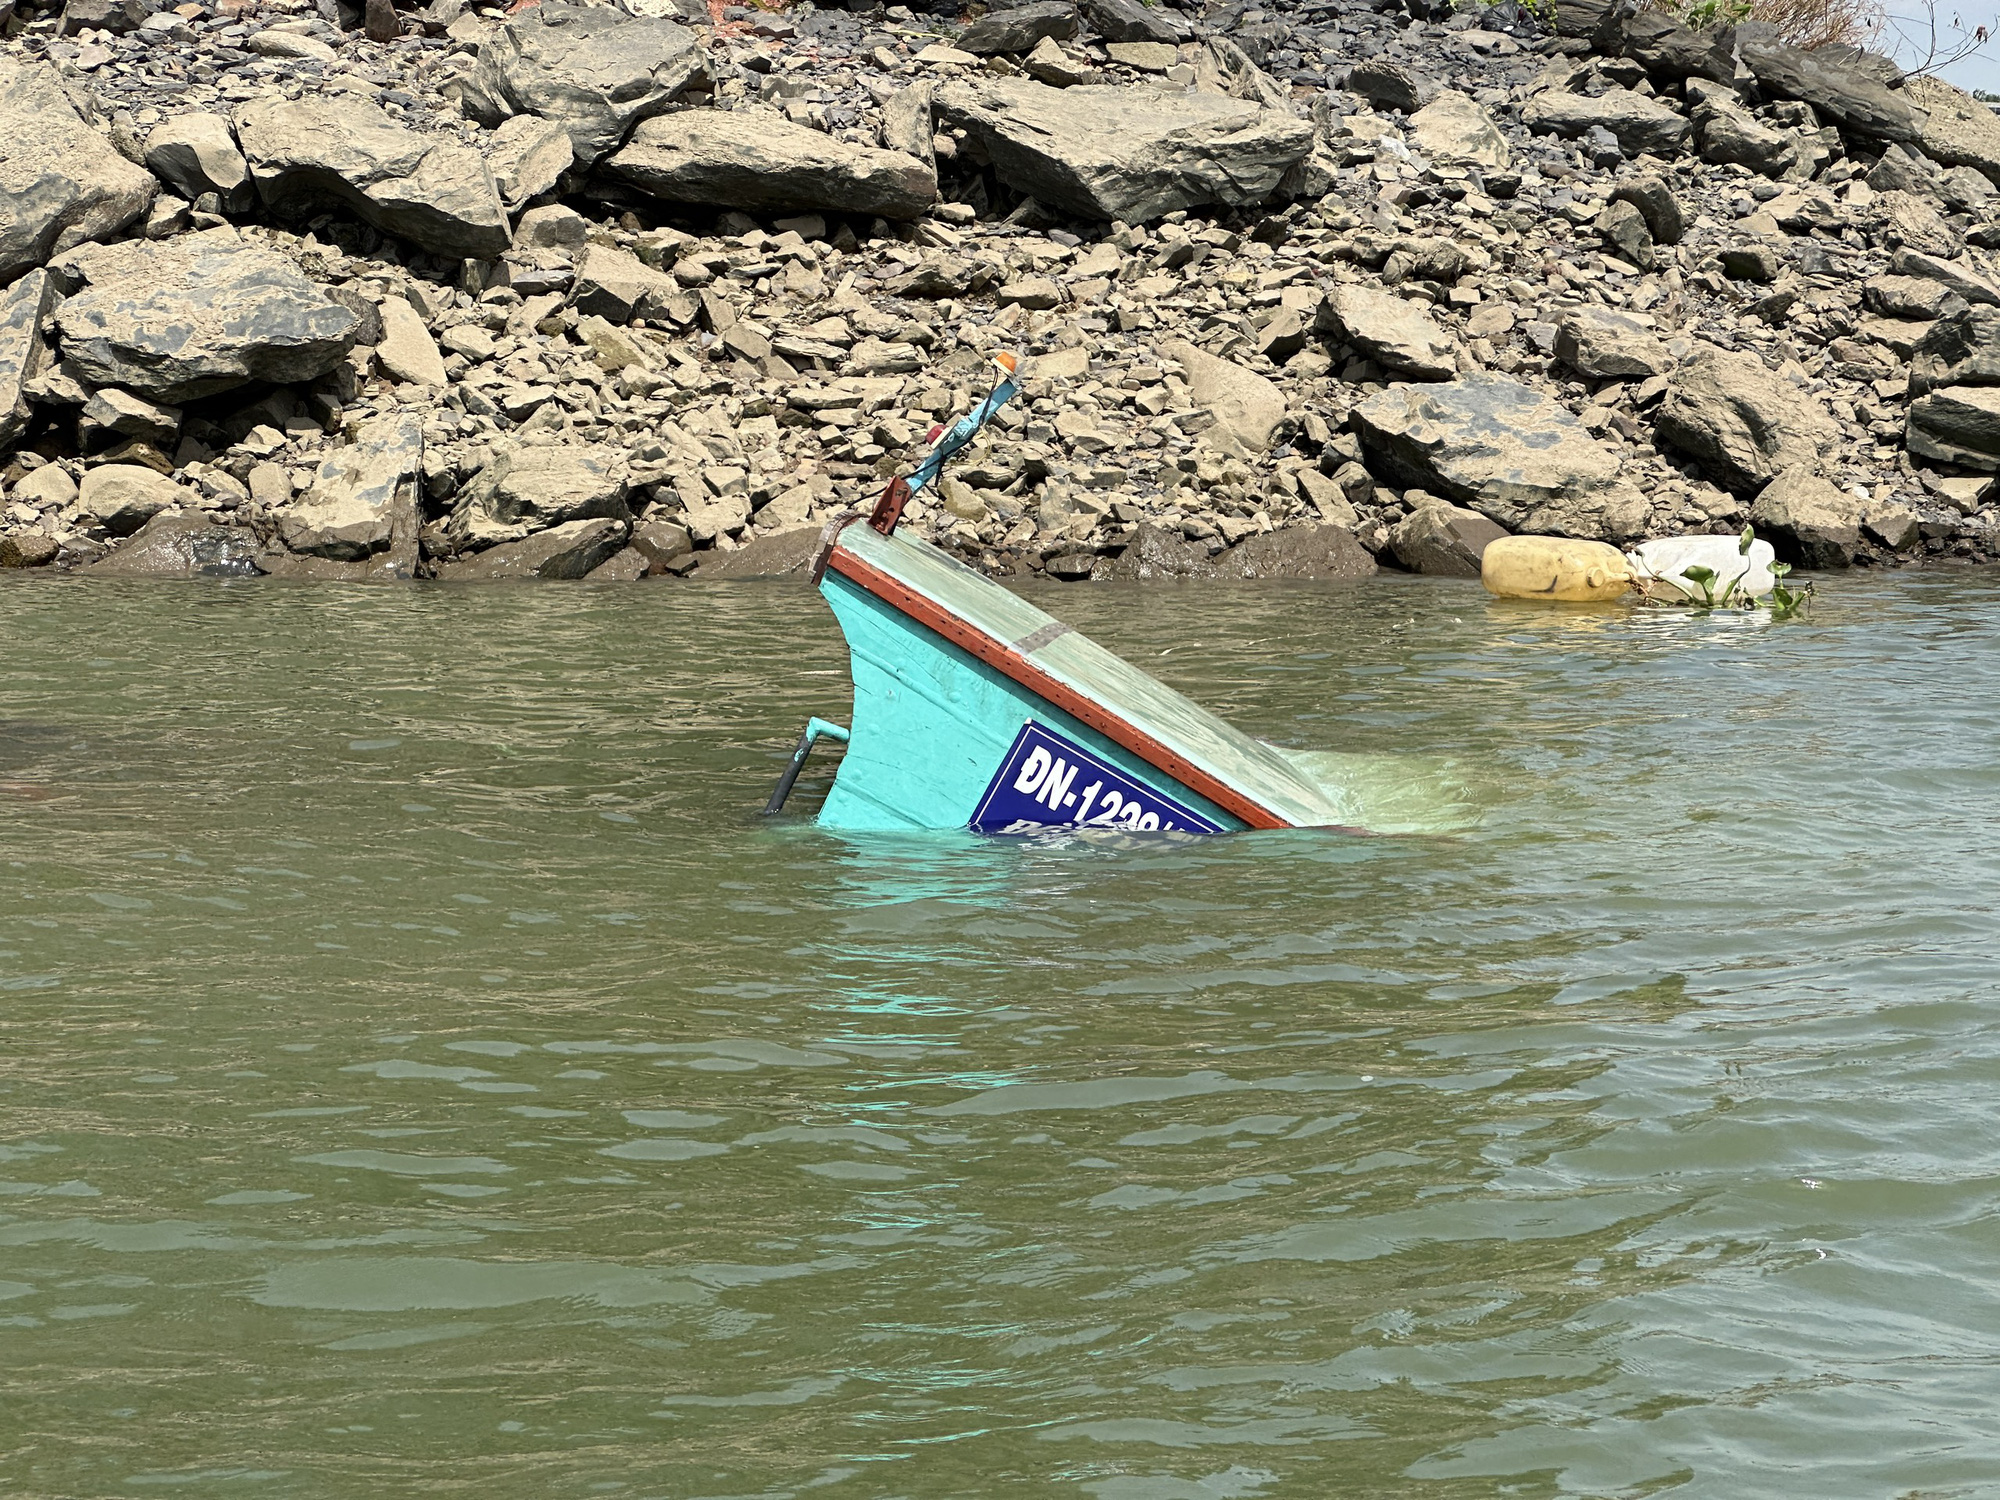 Pregnant woman dies after passenger boat overturns in Ho Chi Minh City